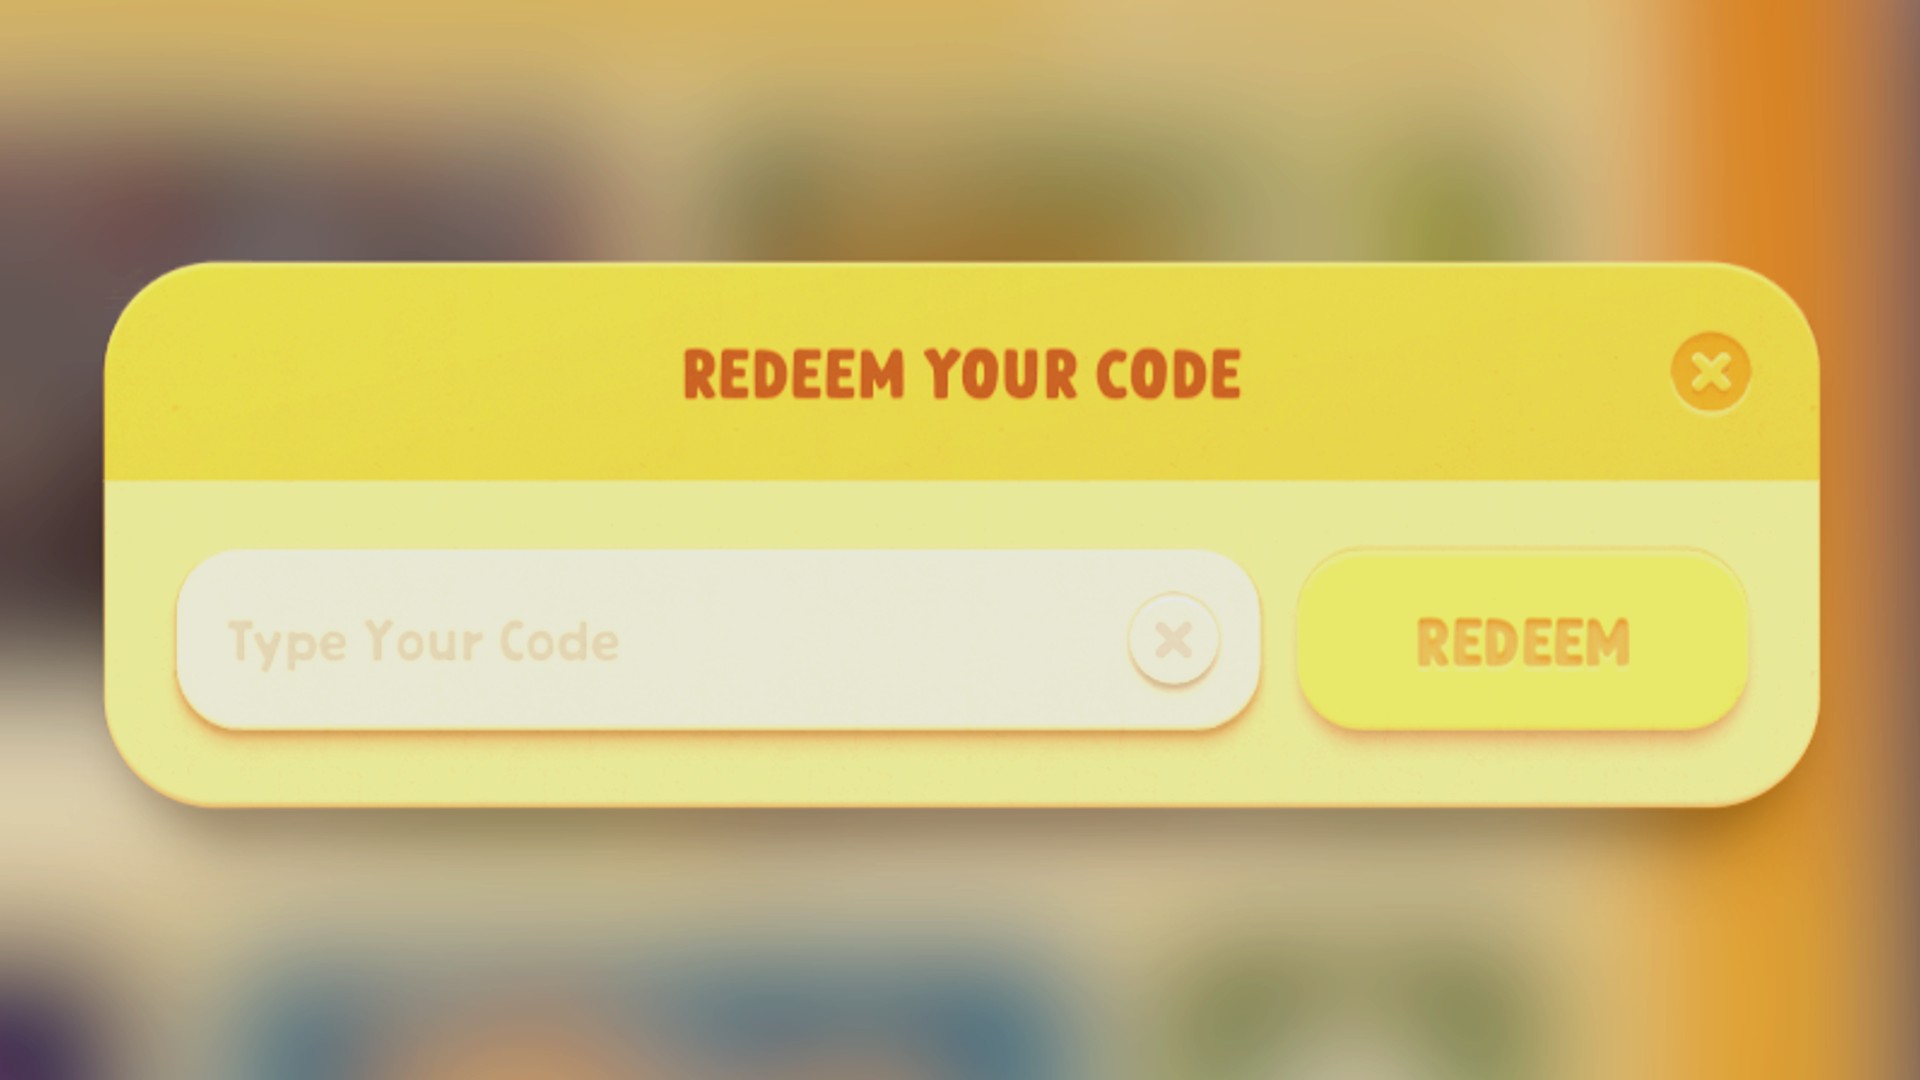 How to make a Discord-Roblox codes for redeem codes gui